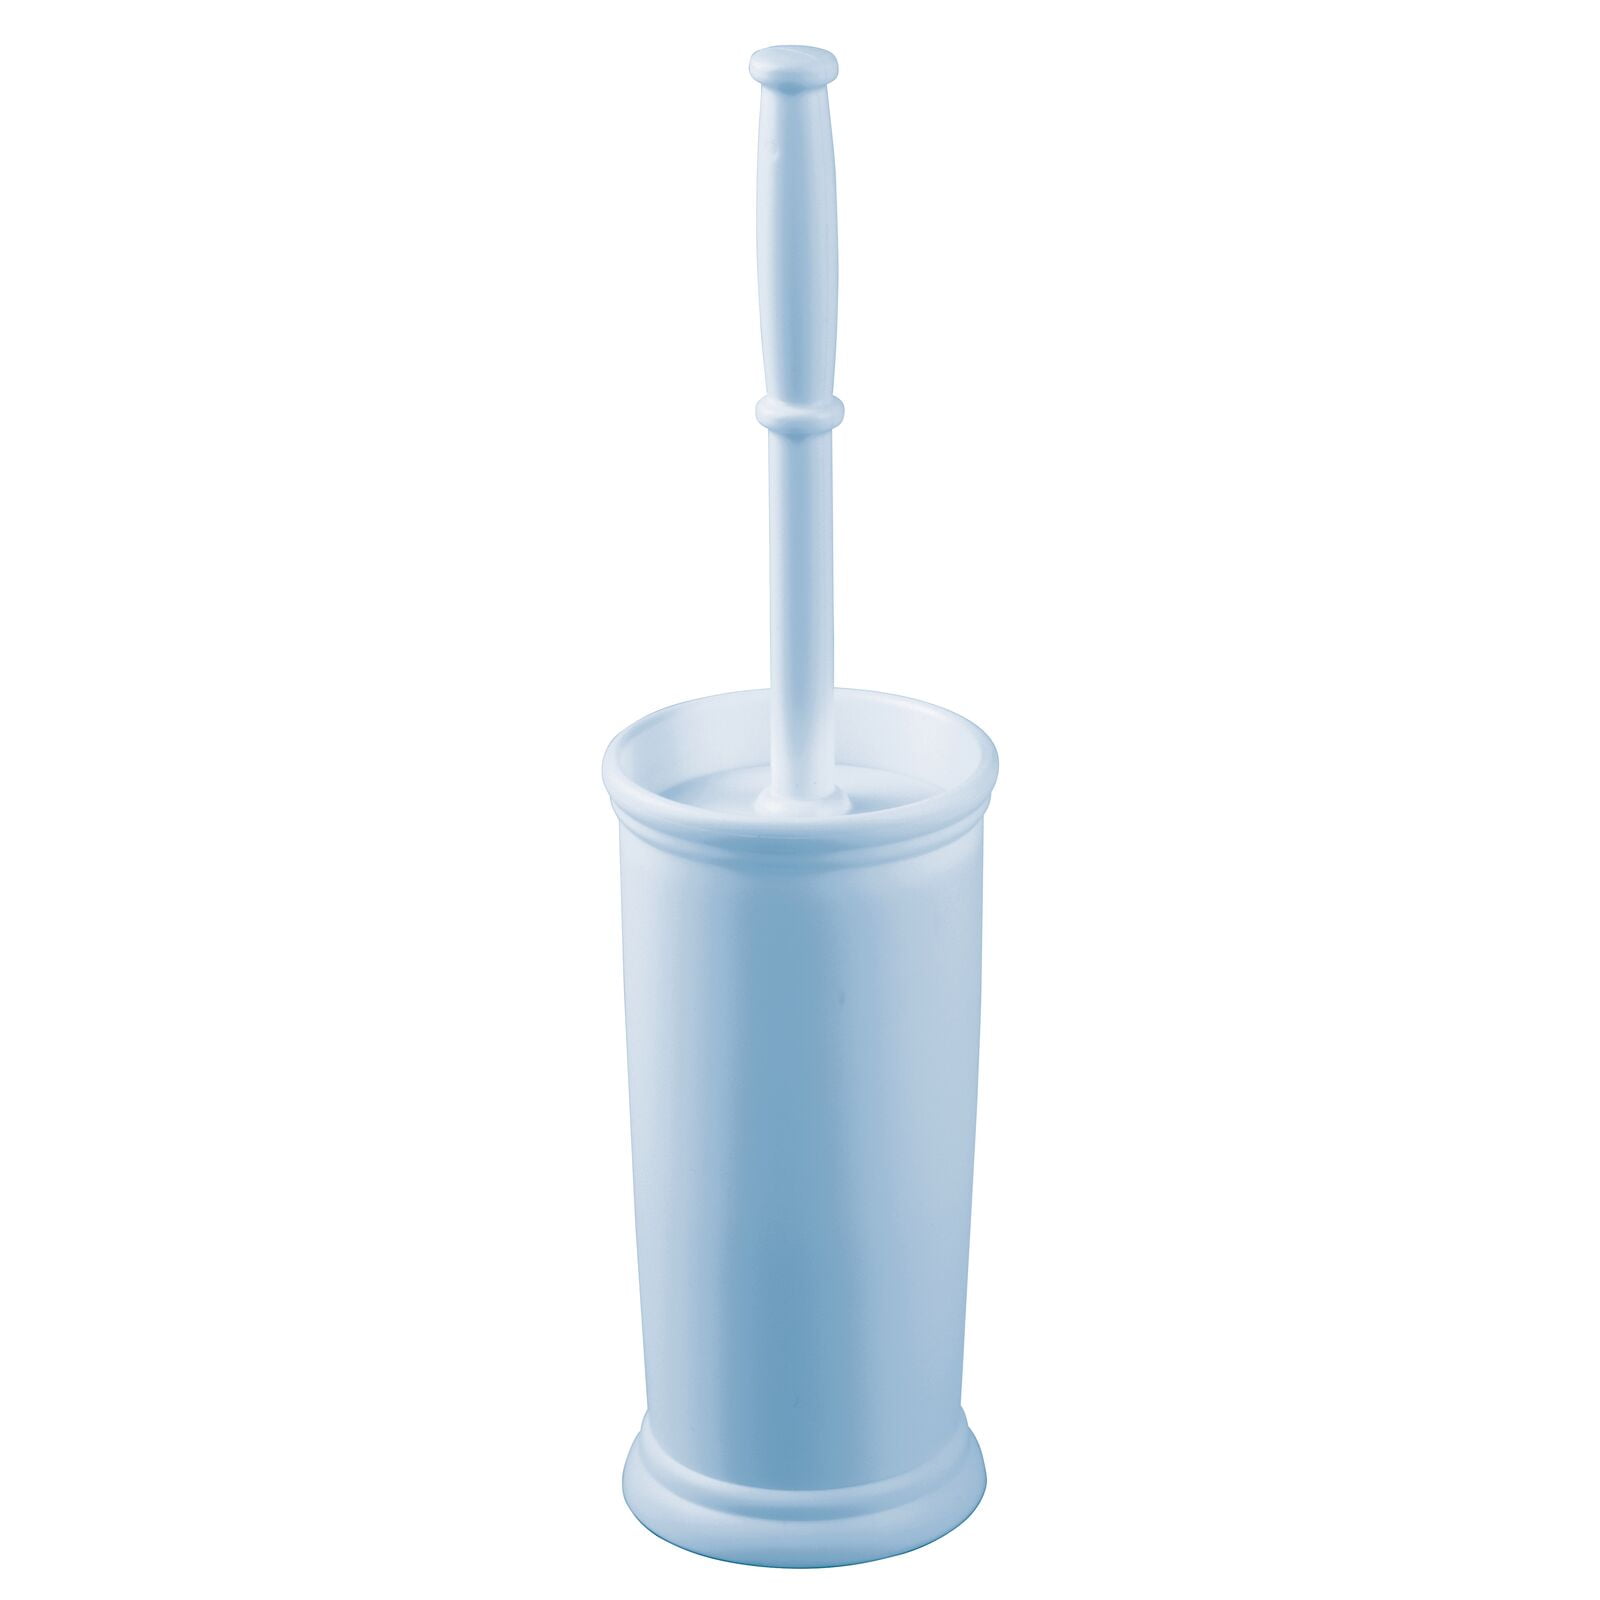 Details about   Freestanding Plastic Toilet Bowl Brush with Holder Deep Cleaning Light Blue New 